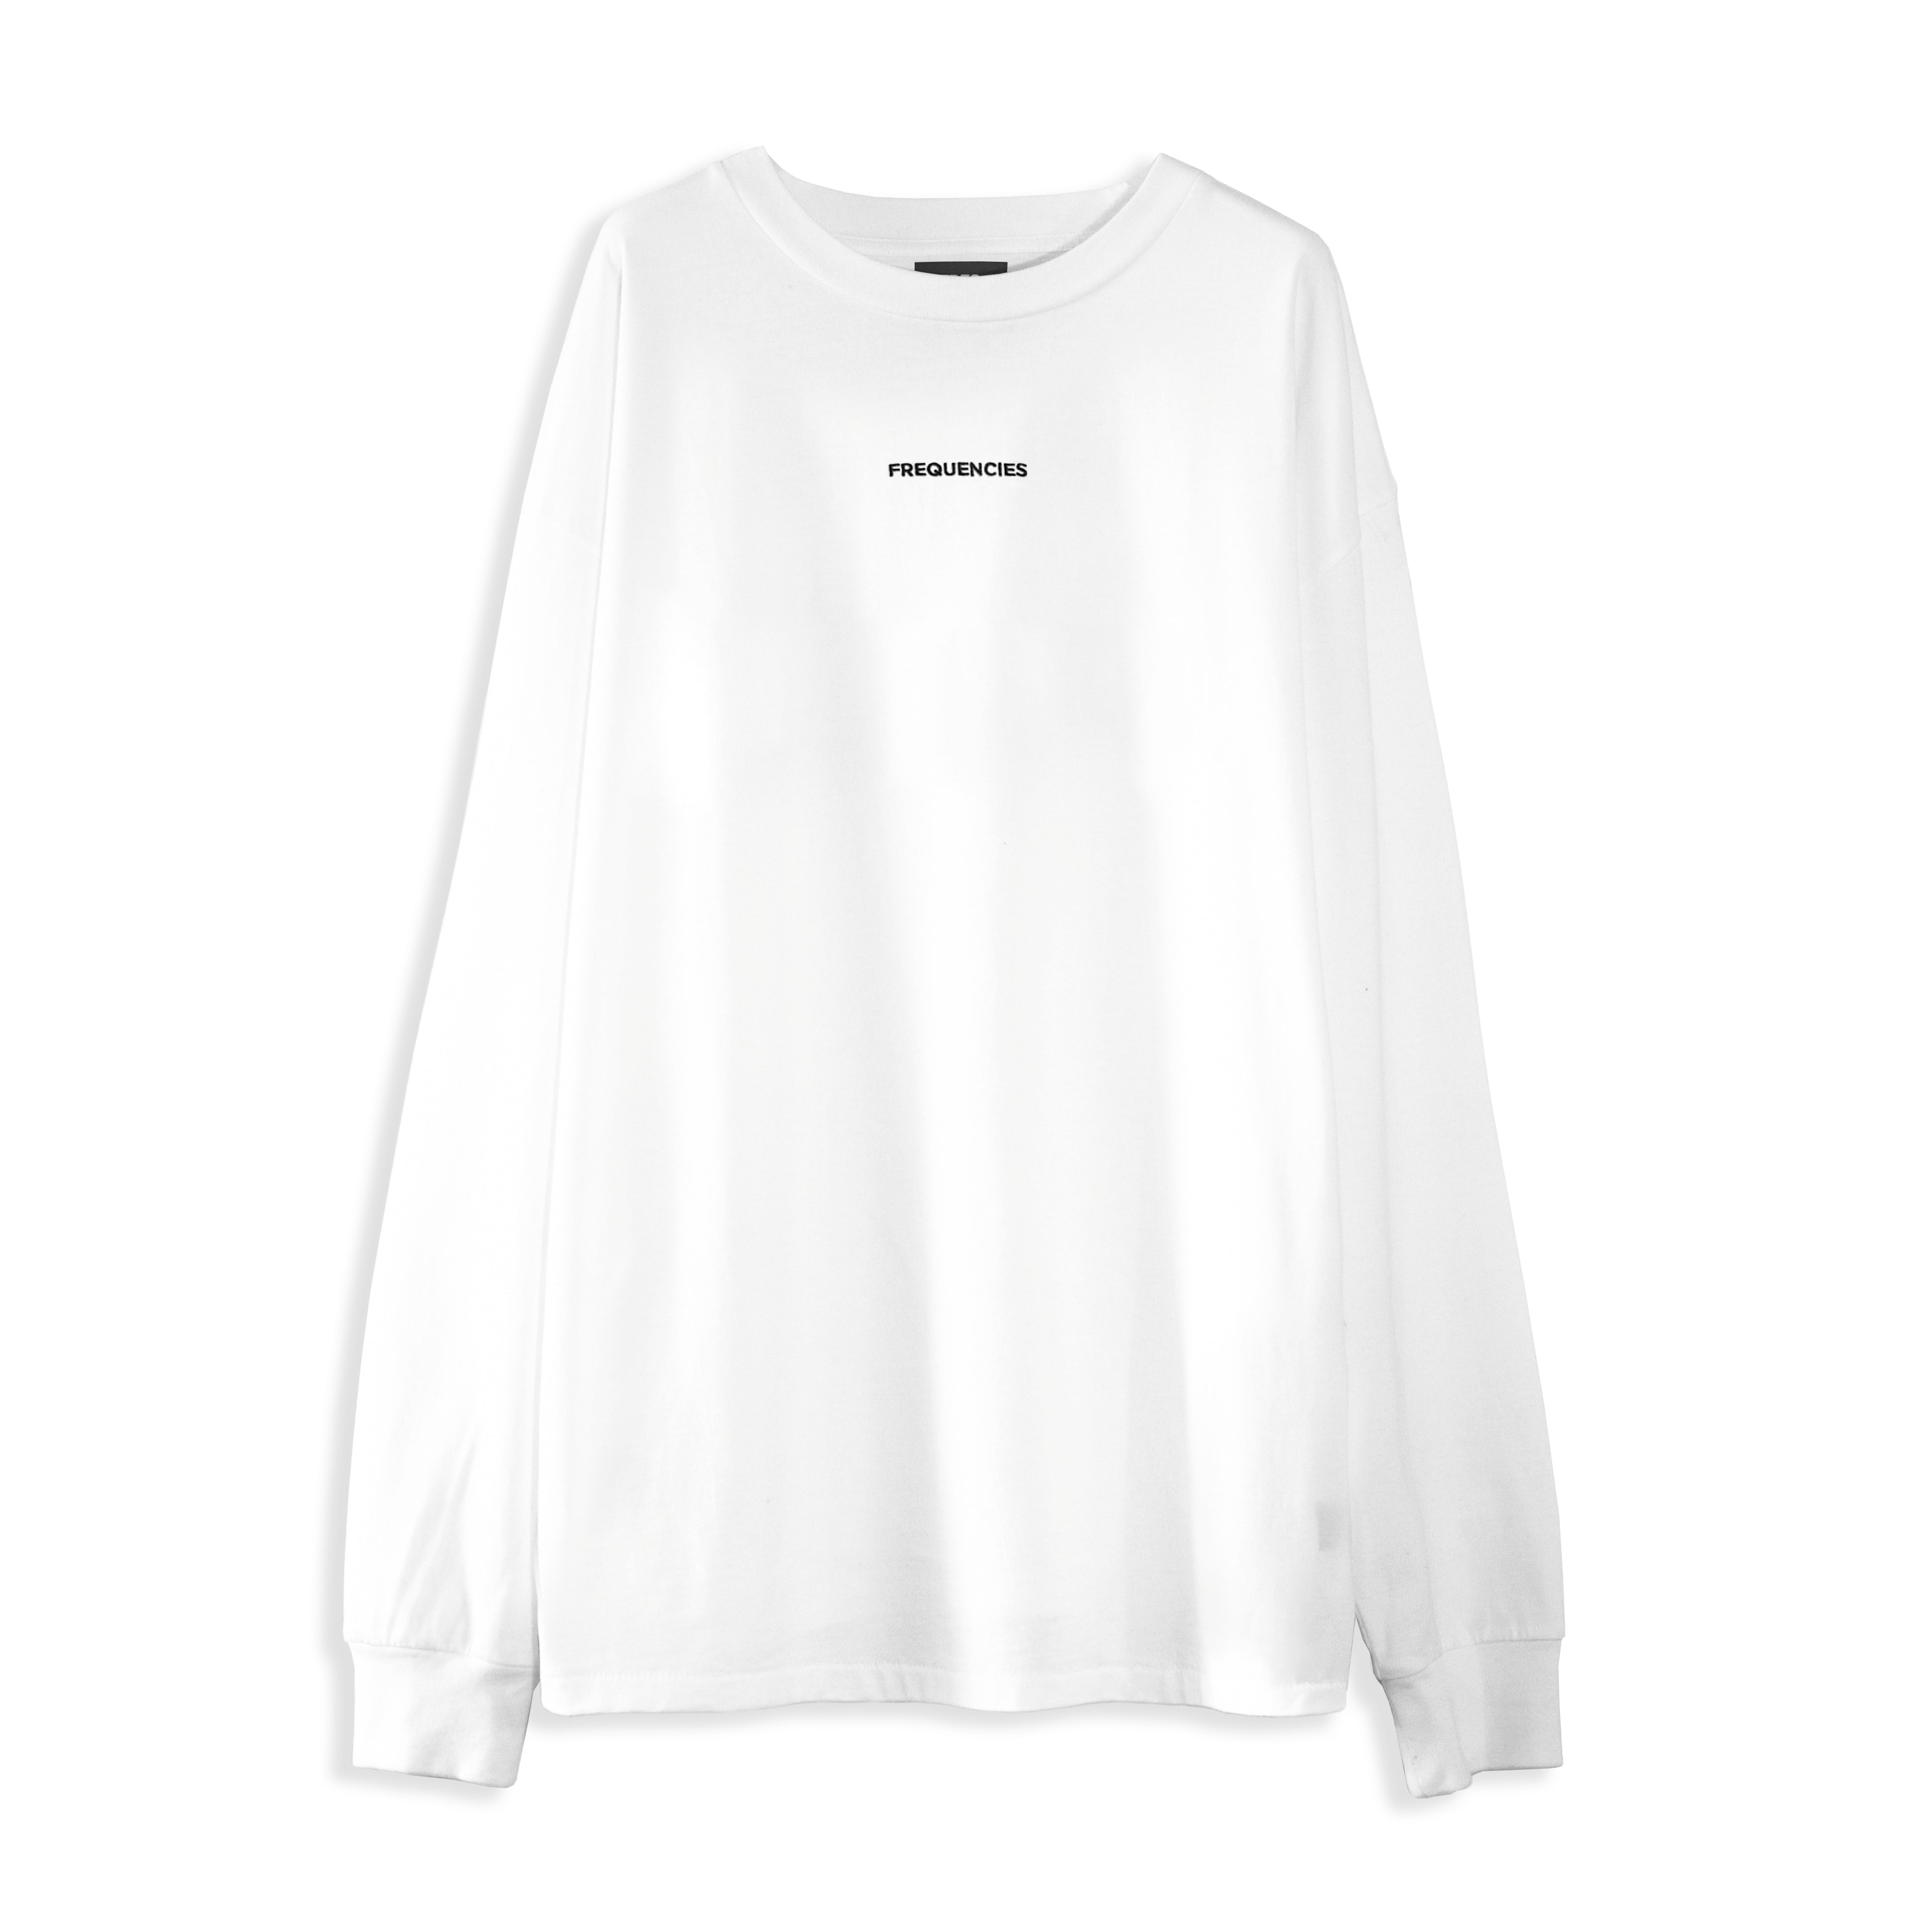 EMBROIDERED LONG SLEEVE TEE - WHITE NOISE